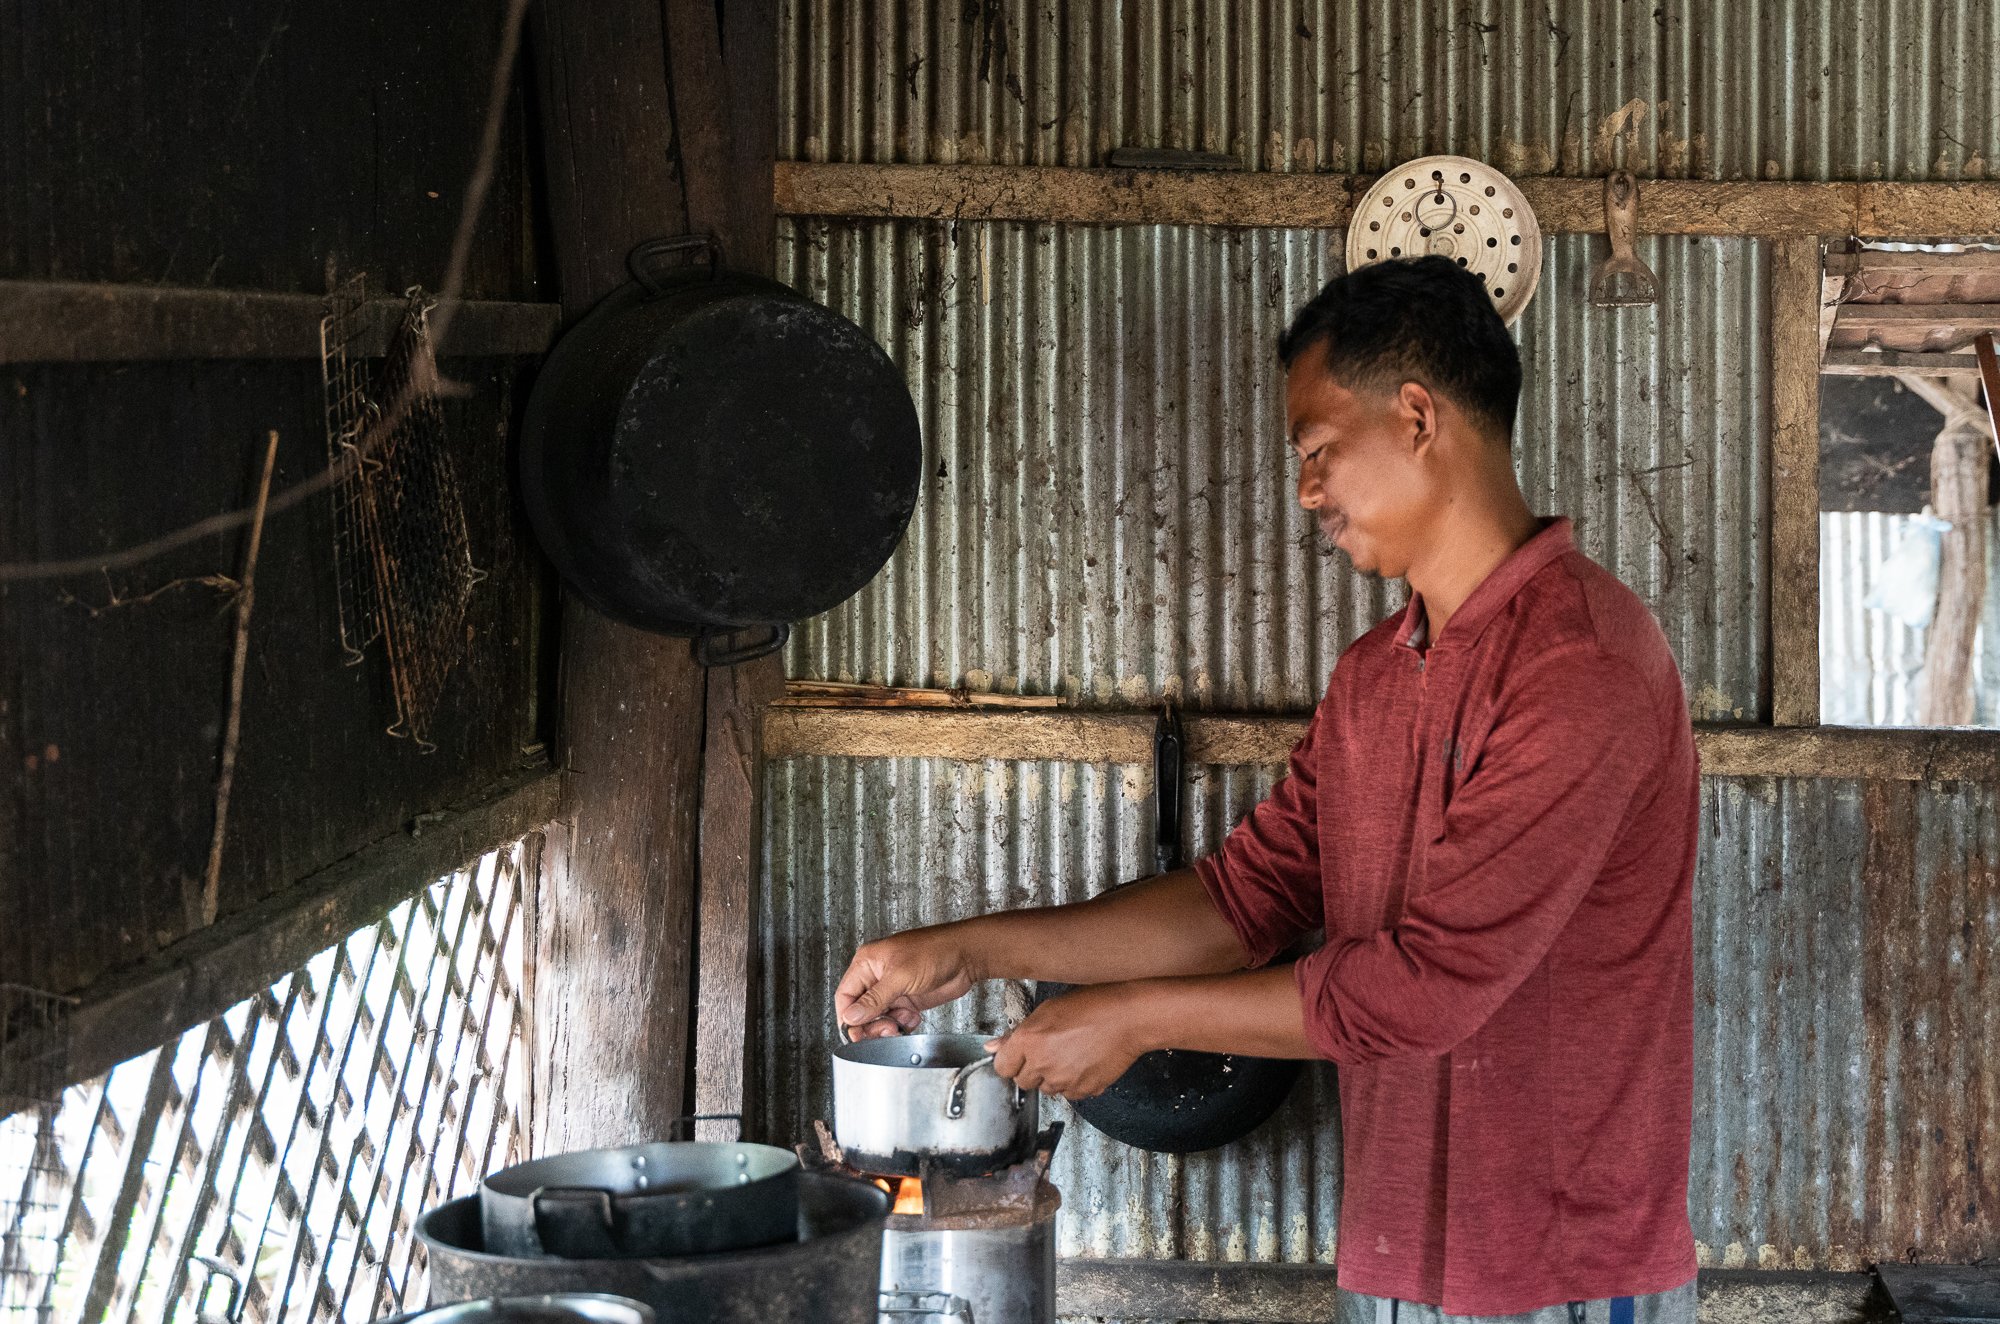 Heng Vichet cooks using his ACE stove he bought using a loan from the NGO Kiva, Siem Reap, Cambodia